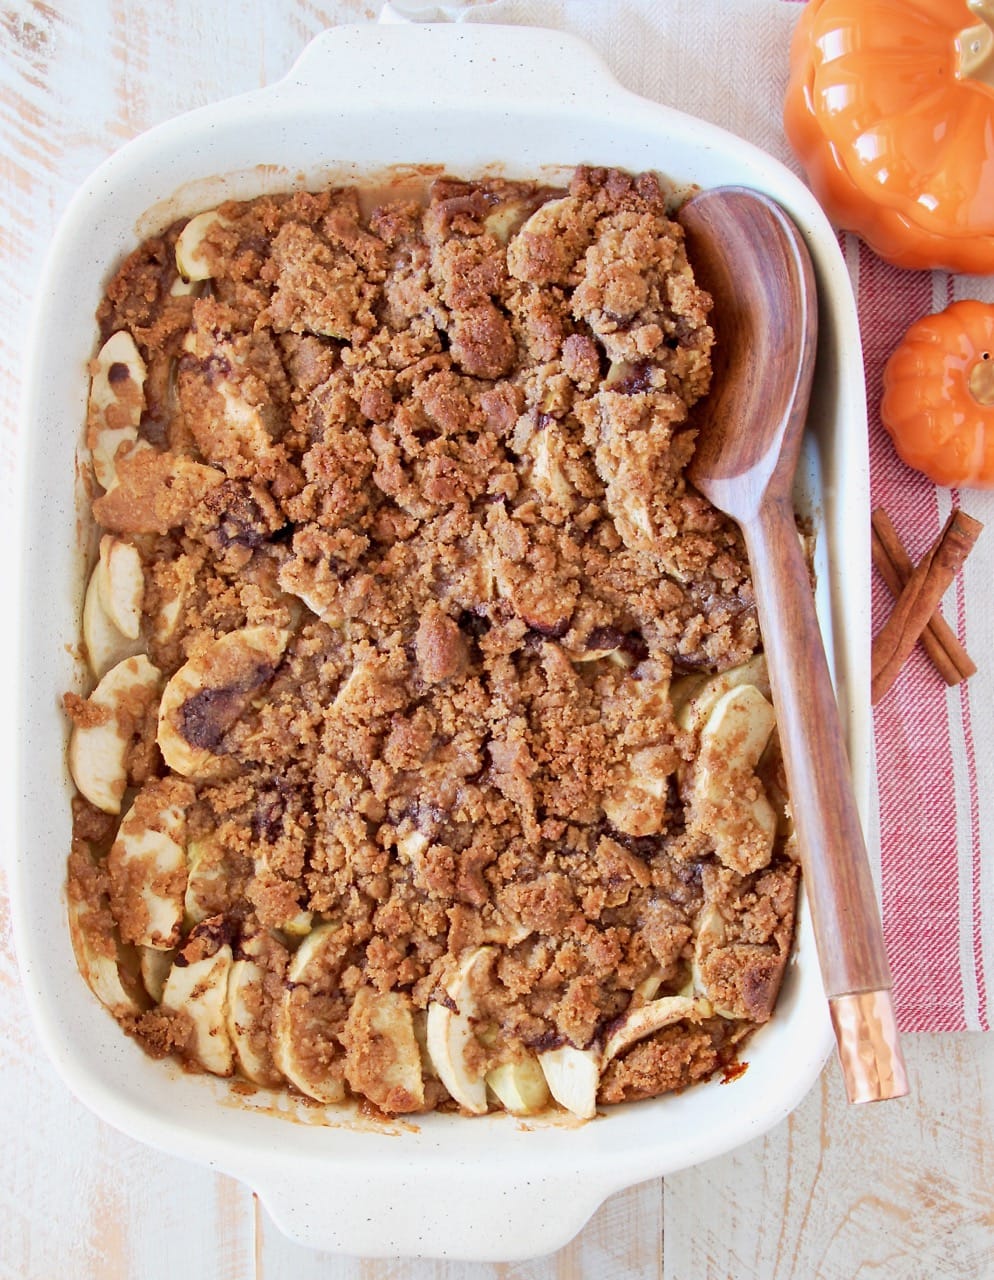 Overhead shot of apple crumble in a white casserole baking dish with a wooden spoon, sitting next to small orange pumpkins and cinnamon sticks on a red and white striped towel